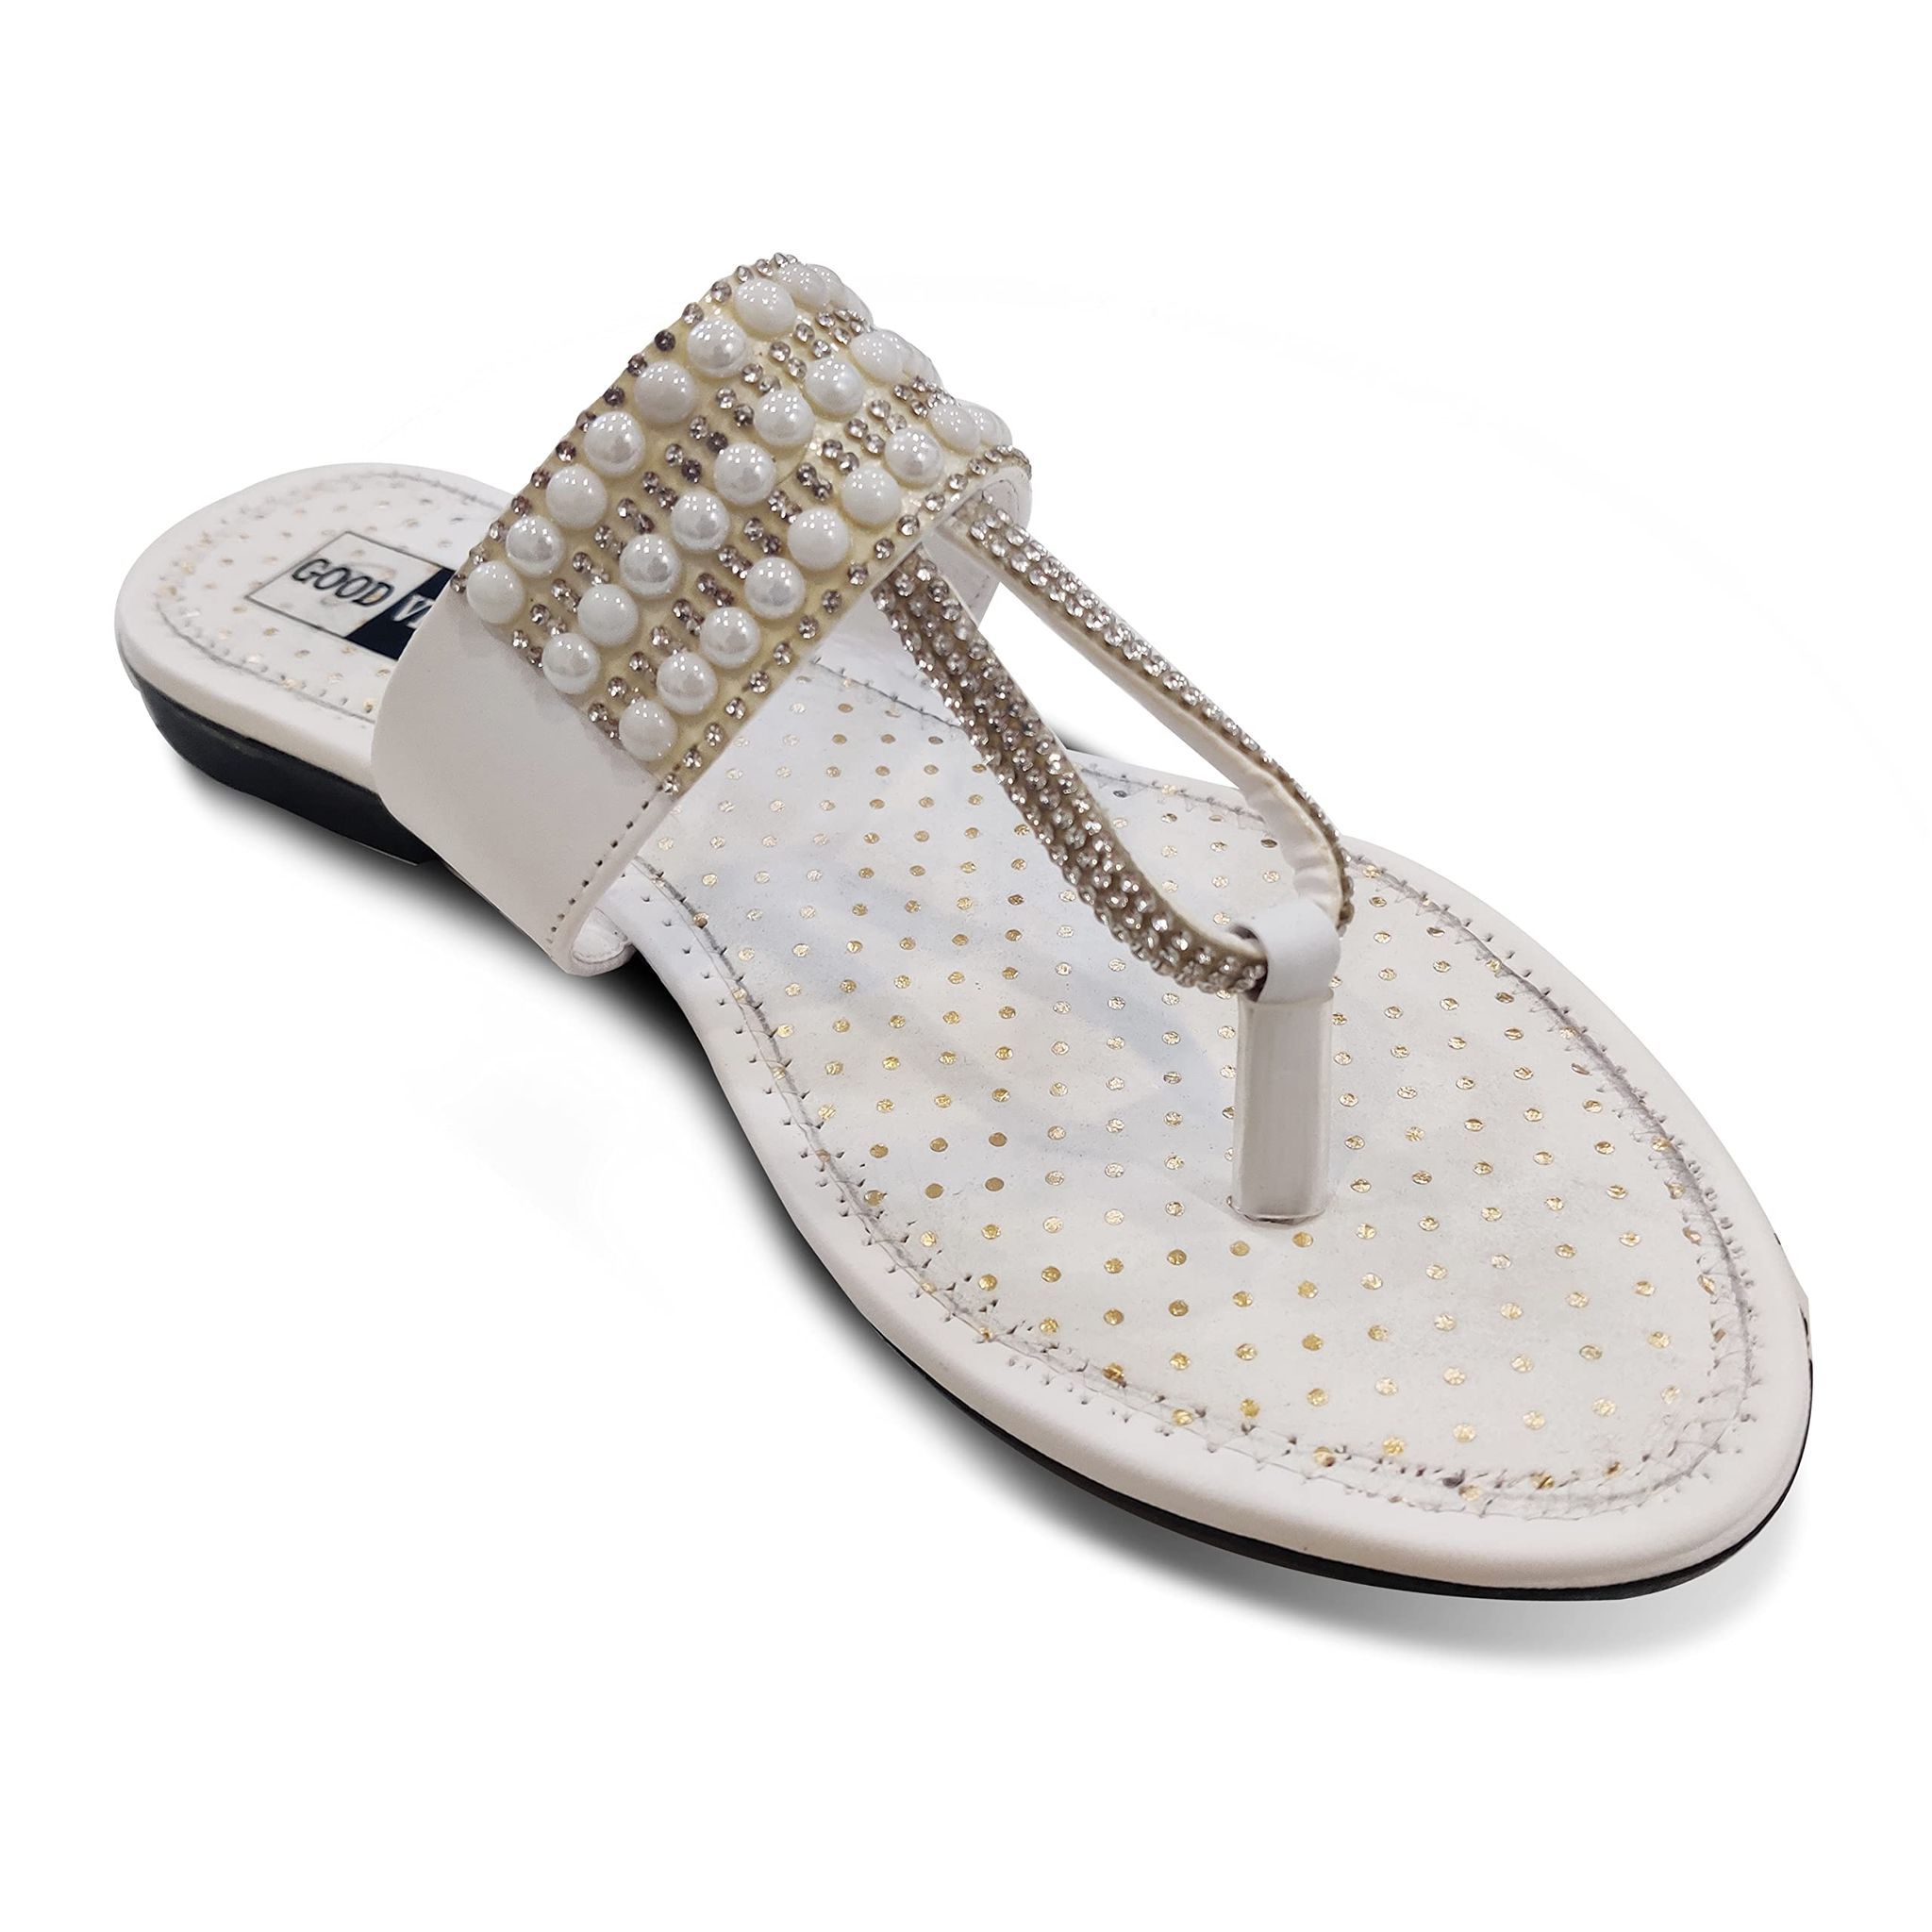 Most Comfortable Sandals for Problem Feet - A Well Styled Life®